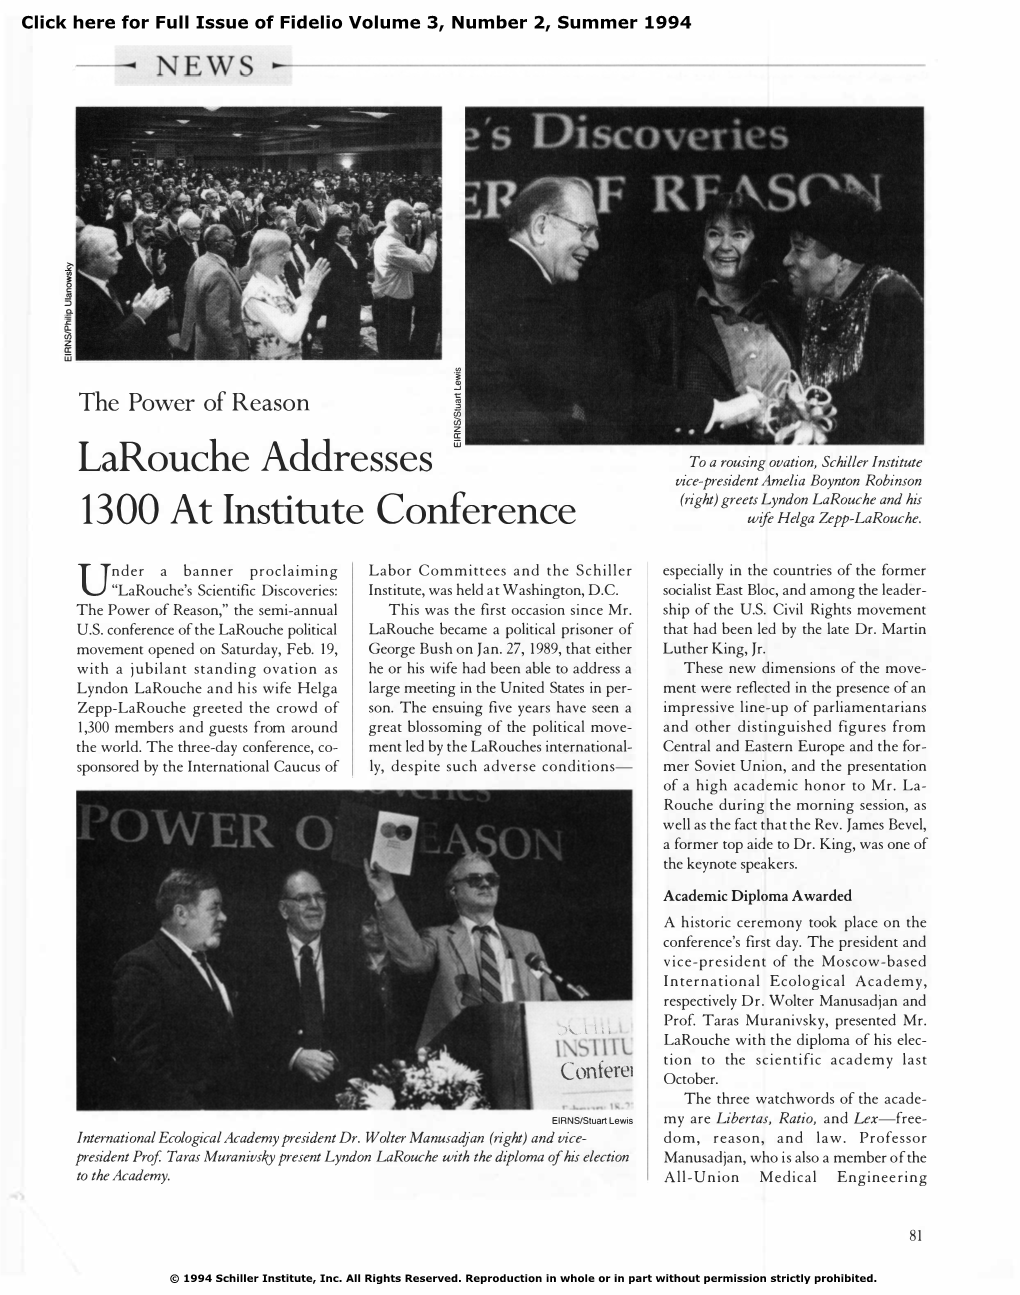 Larouche Addresses 1300 at Institute Conference